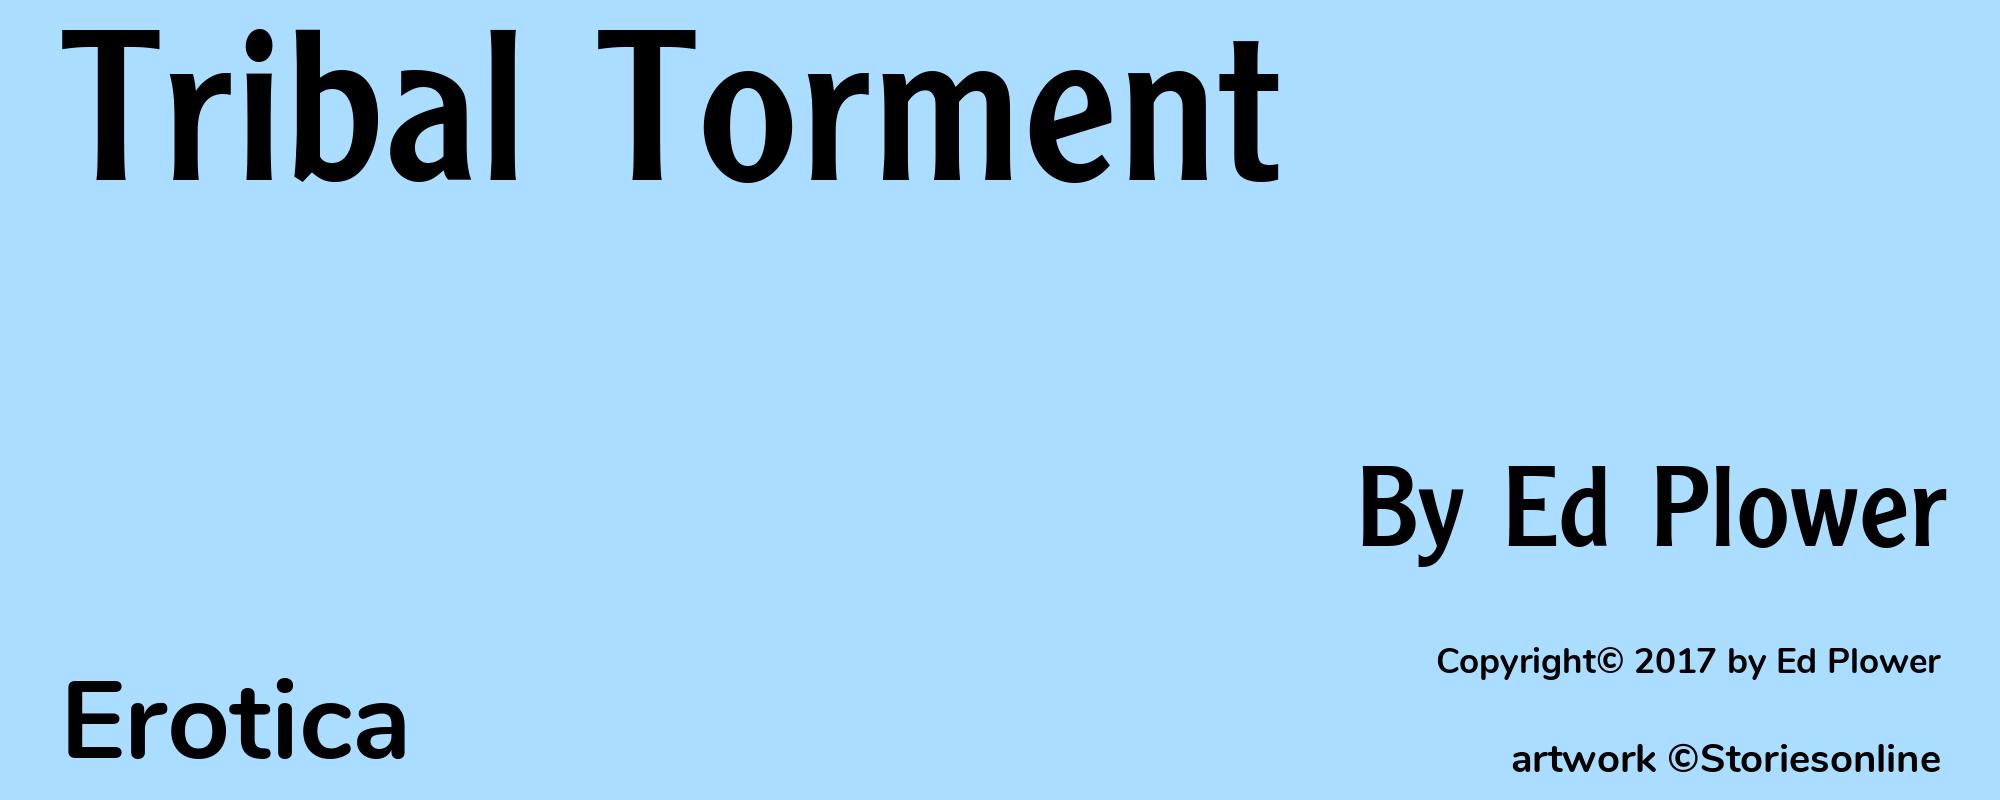 Tribal Torment - Cover